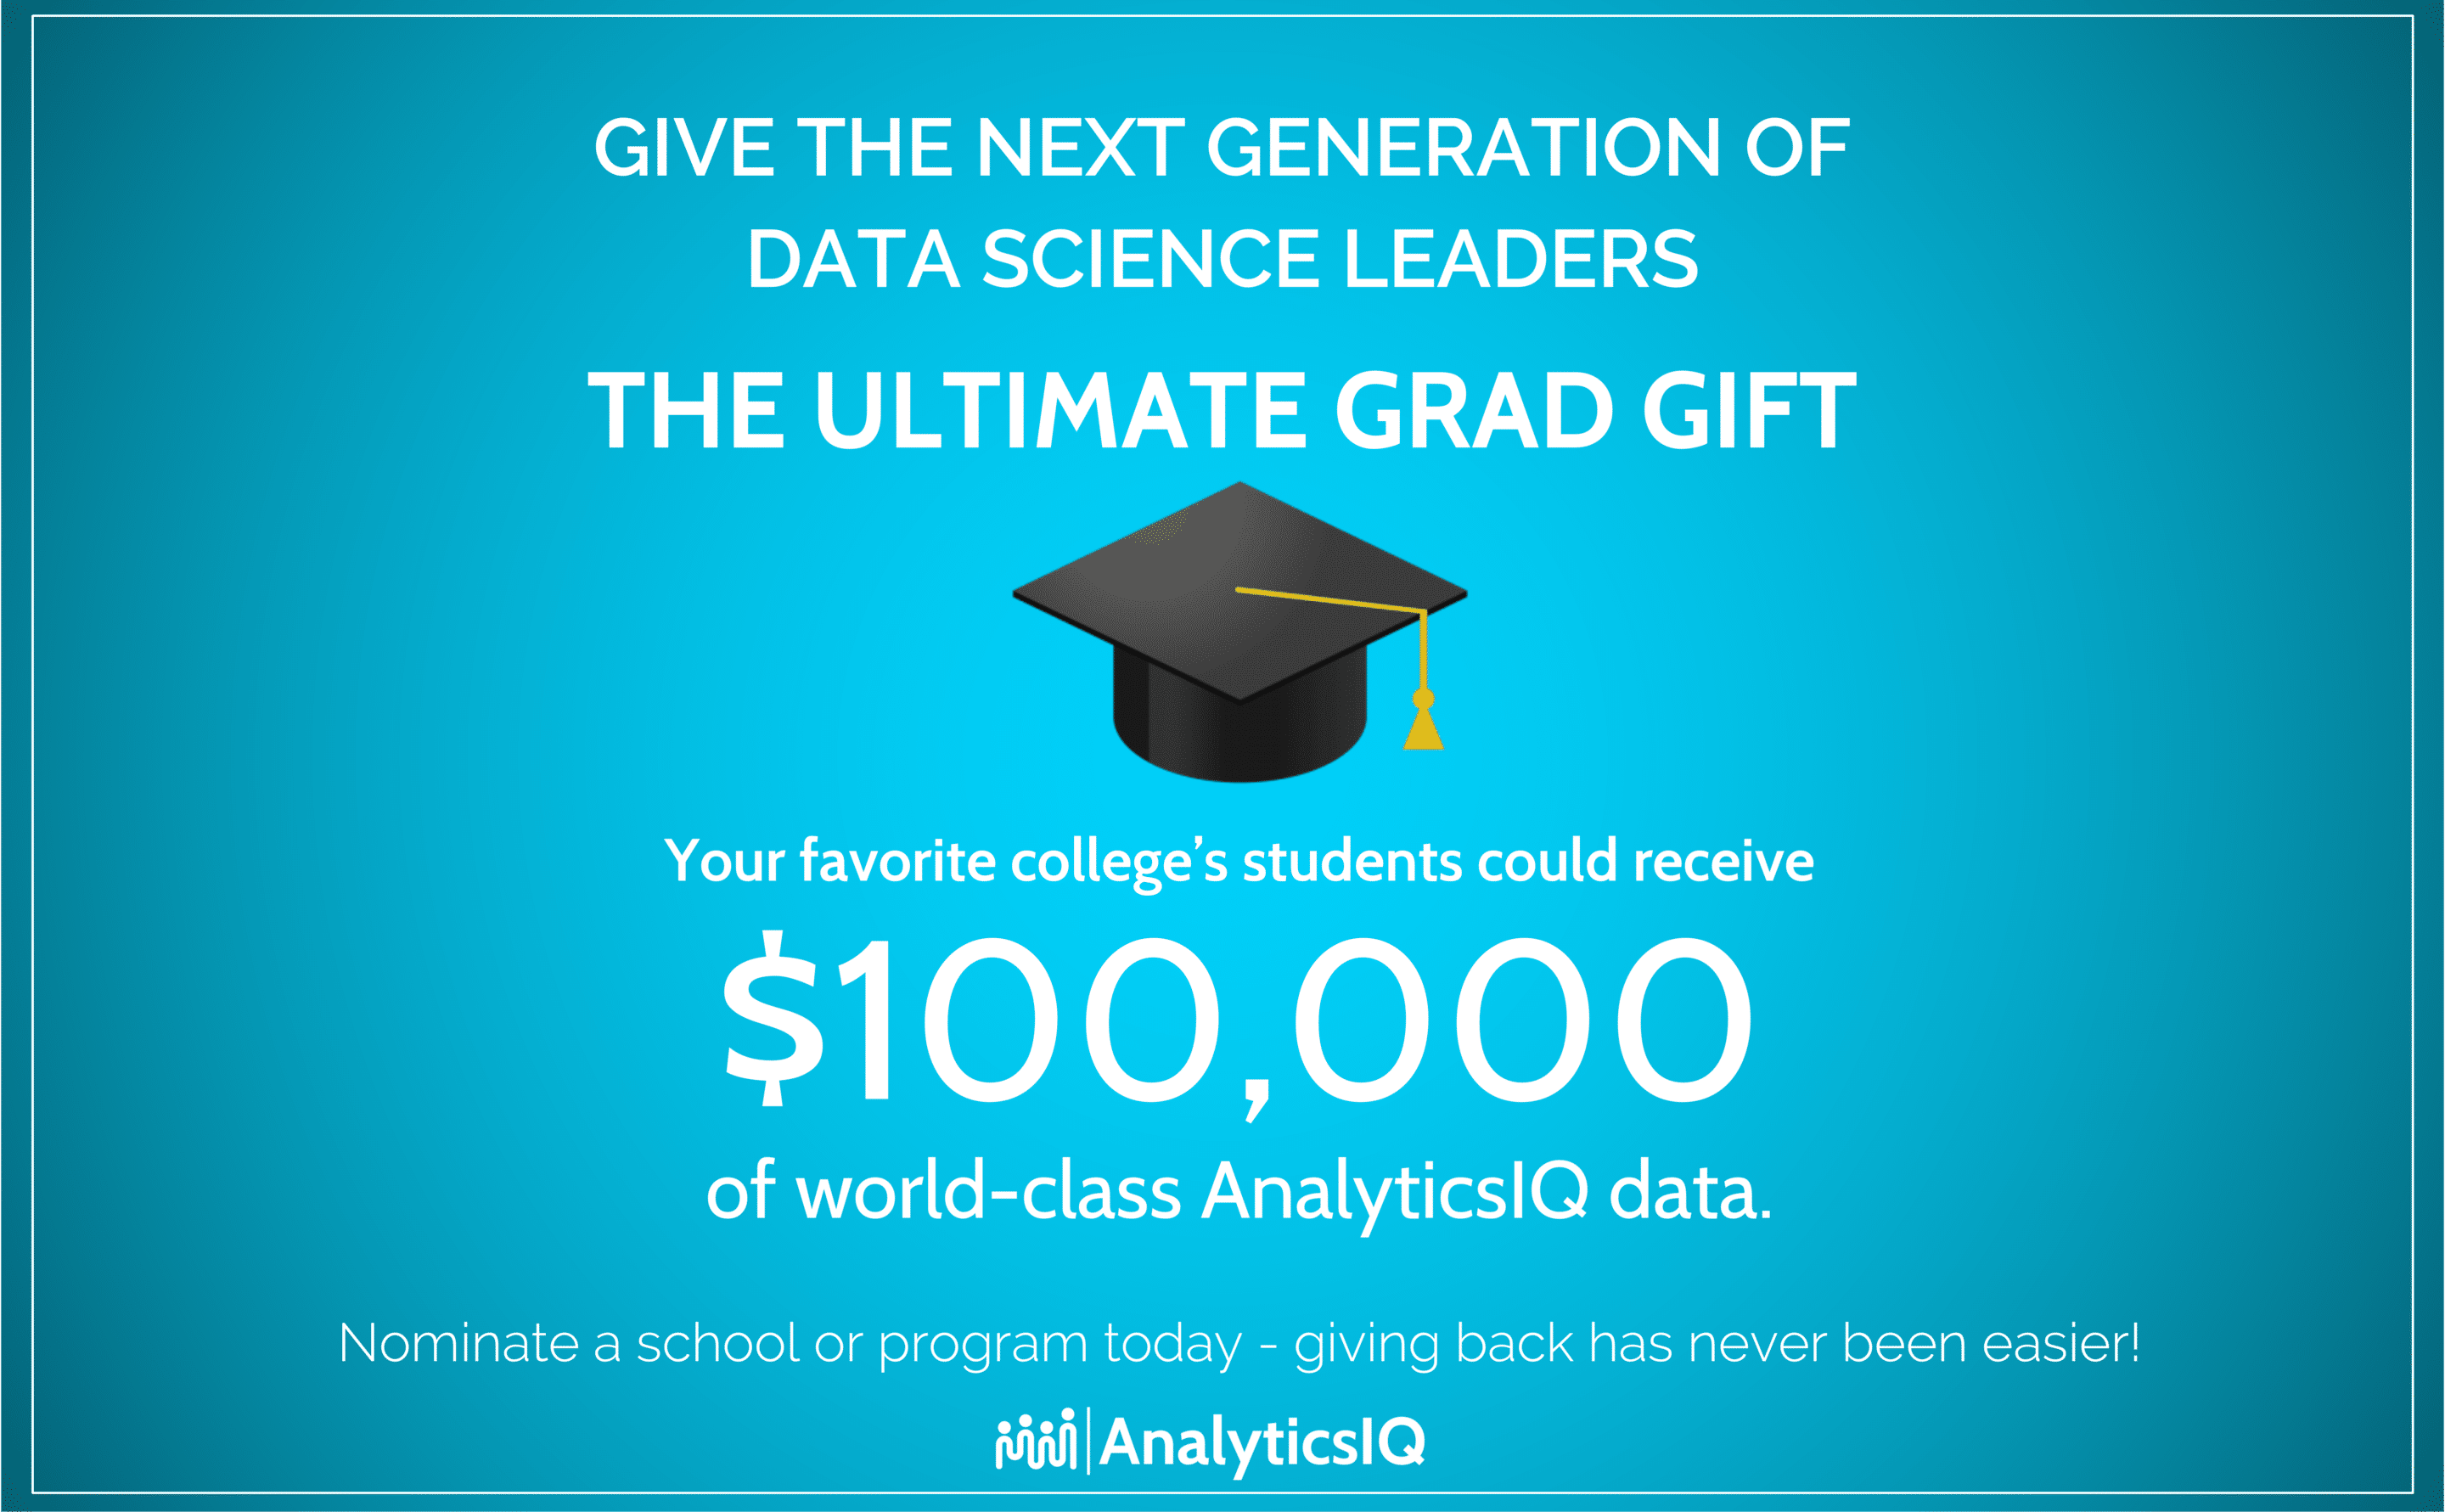 How You Can Empower the Next Generation of Data Science Leaders in Less than 60 Seconds